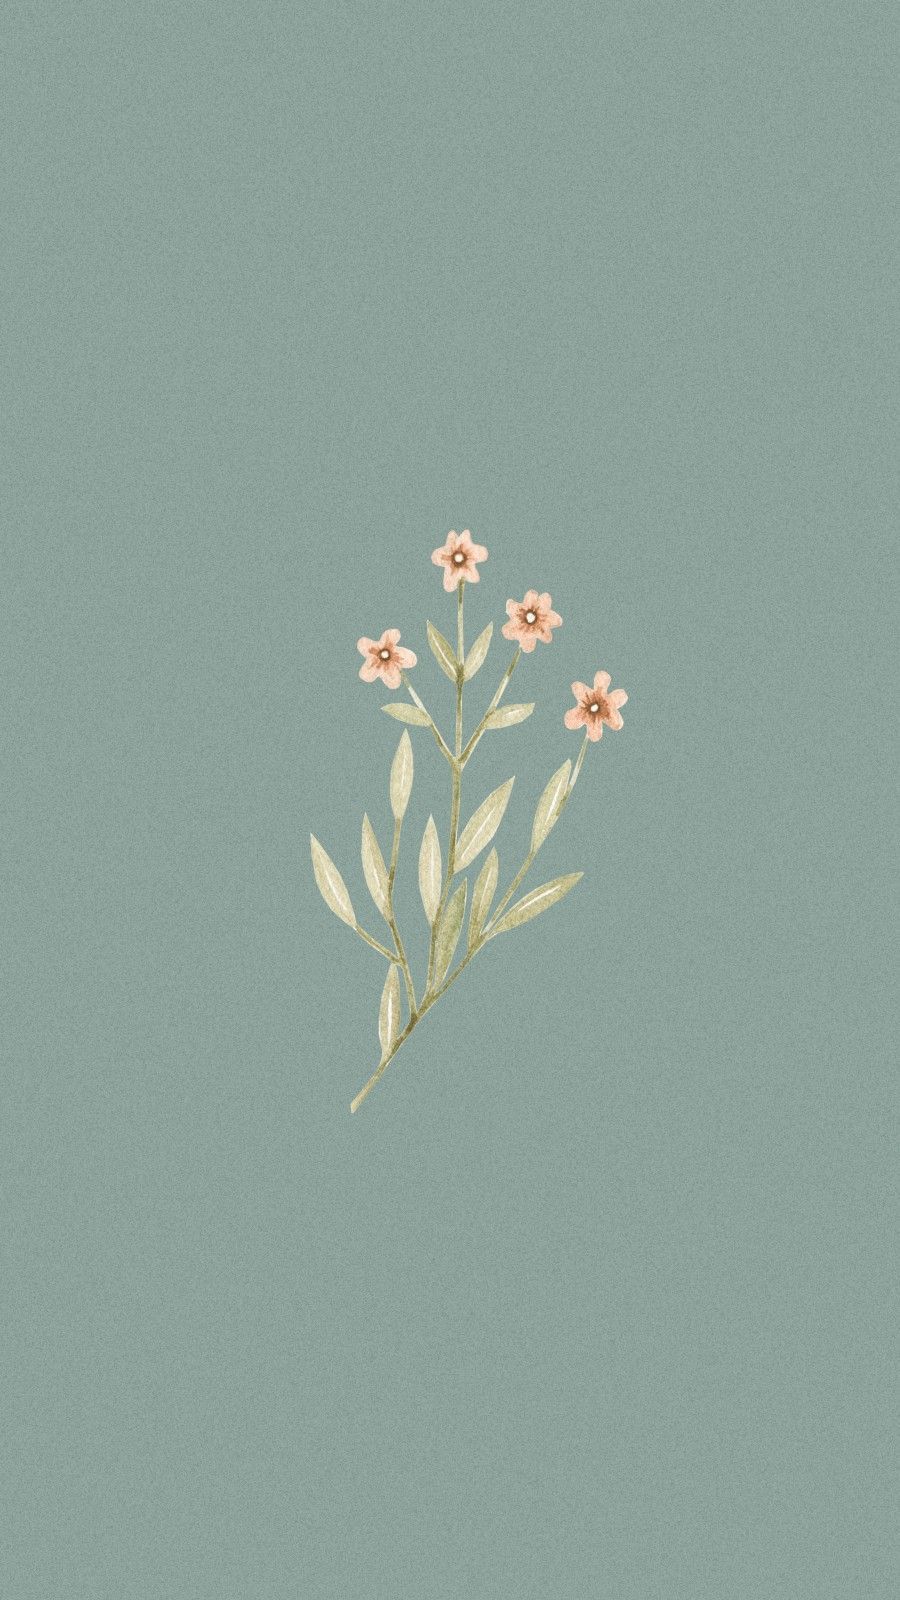 A painting of a flower on a green background - Minimalist, flower